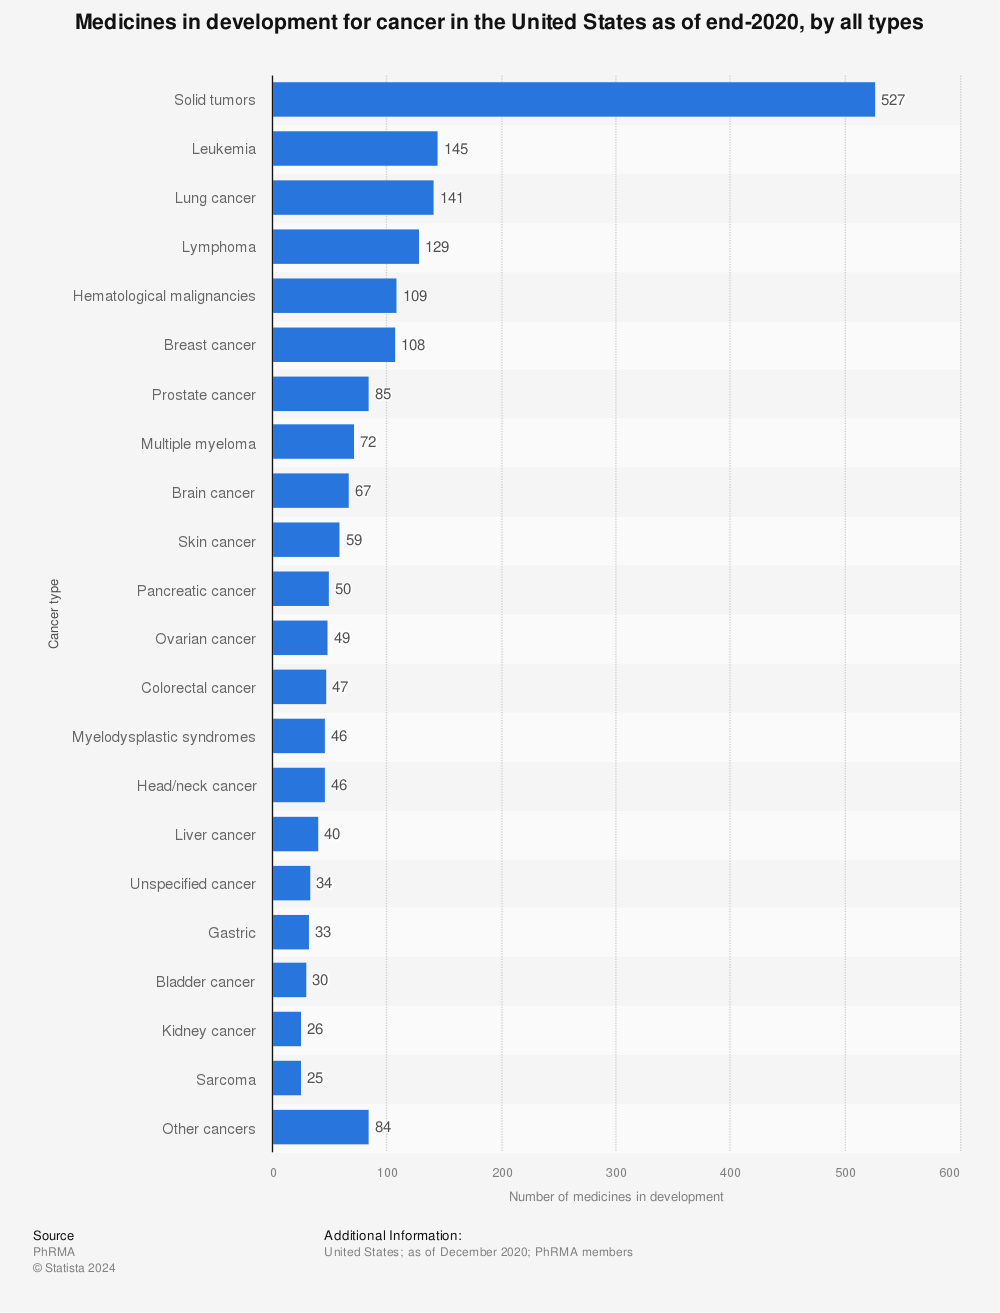 Statistic: Medicines in development for cancer in the United States as of end-2020, by all types* | Statista